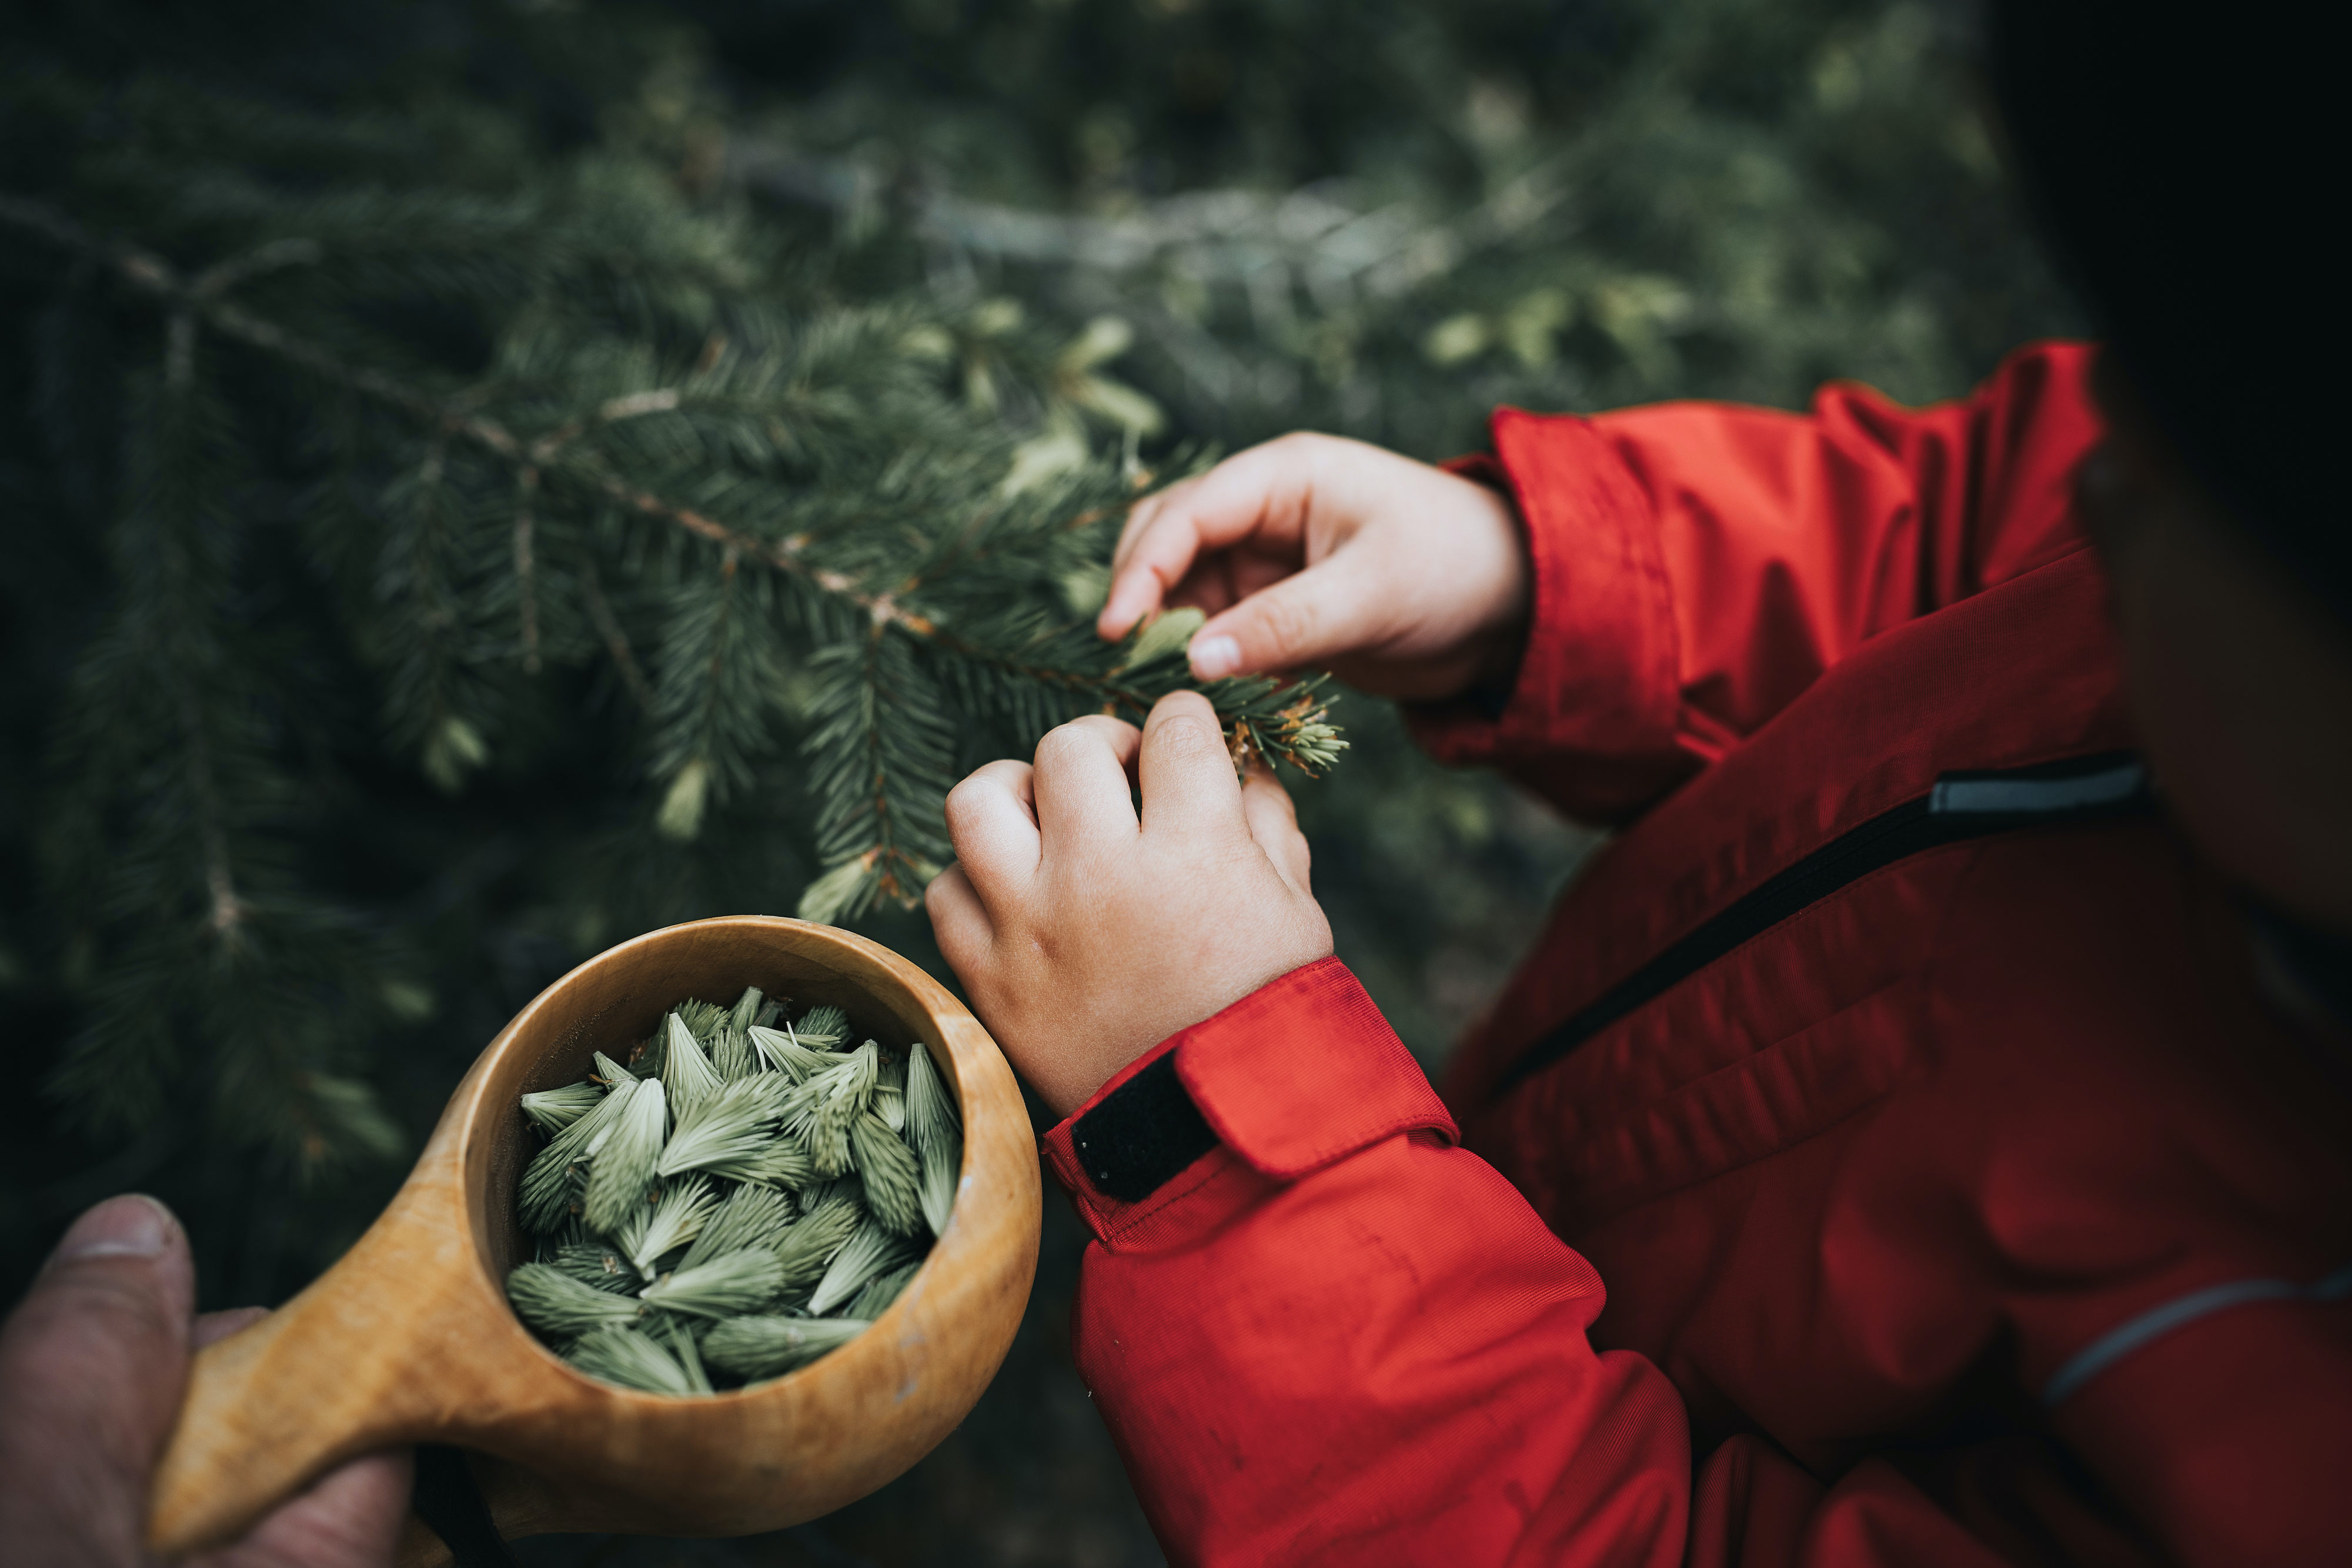 A child collecting young tips of a spruce tree in a Finnish forest.